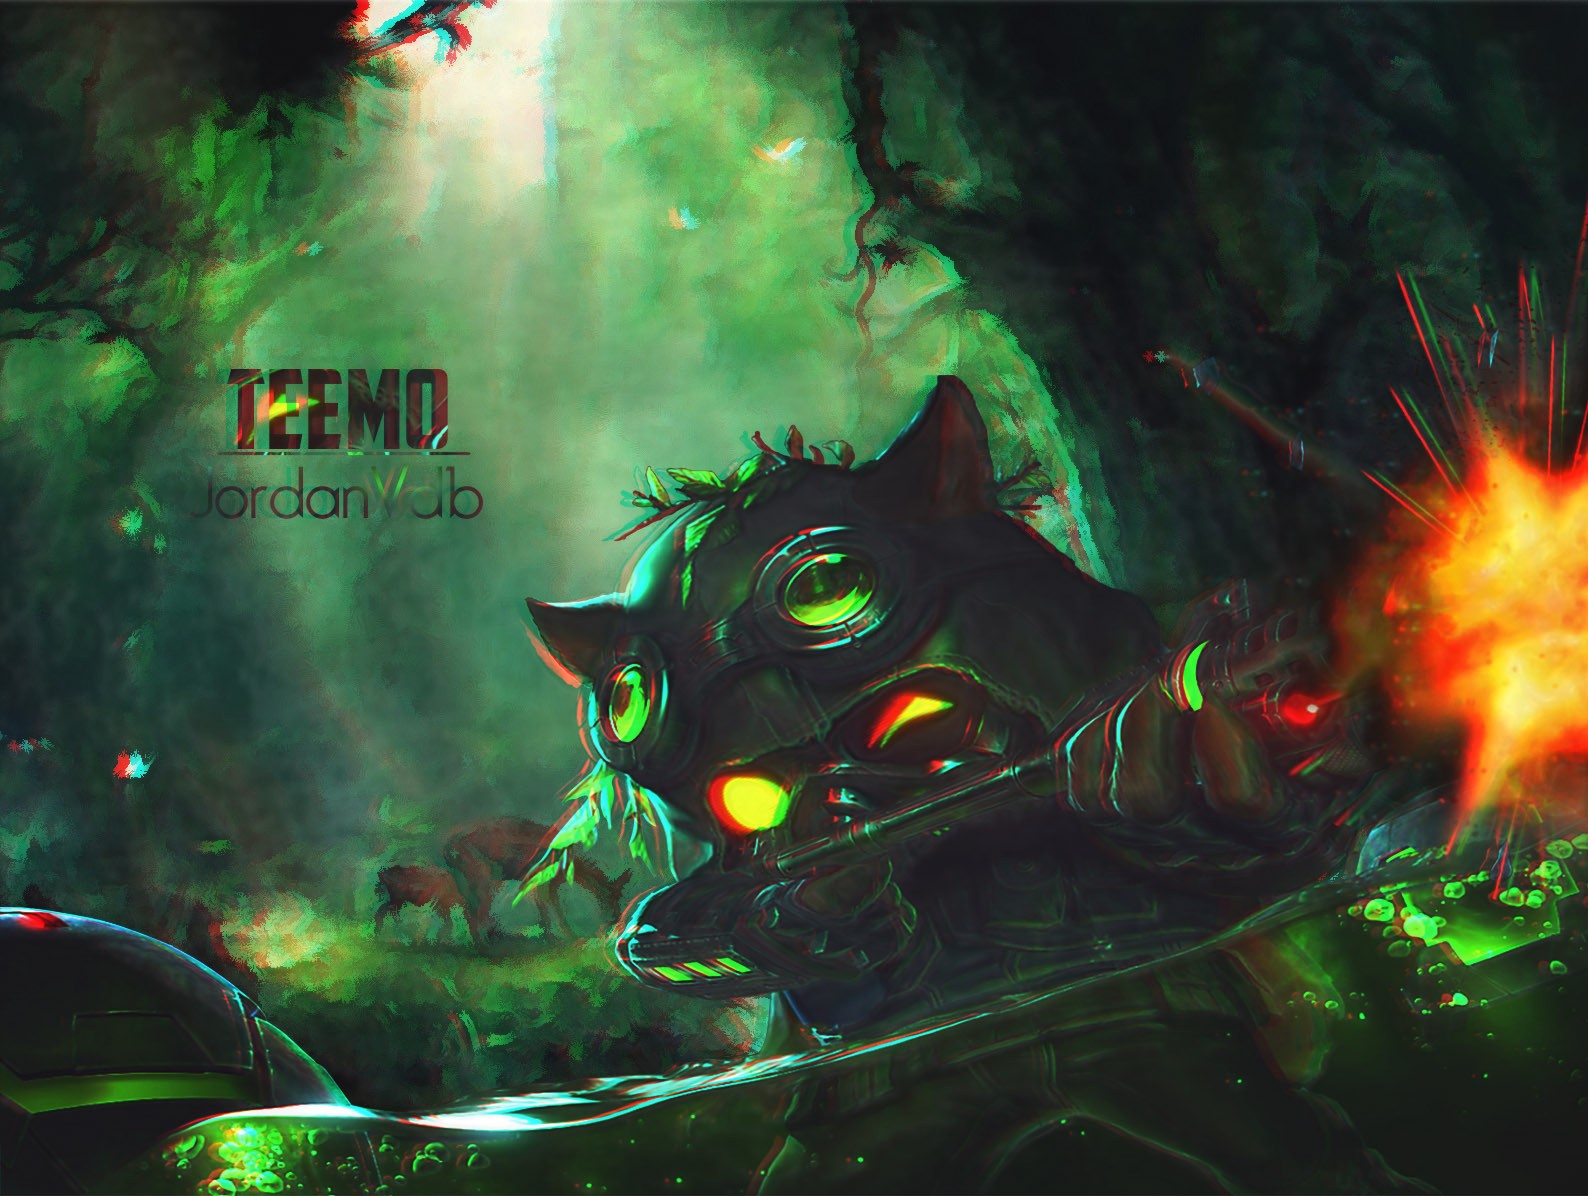 General 1588x1196 Teemo Riot Games League of Legends trolls video game characters Teemo (League of Legends) PC gaming